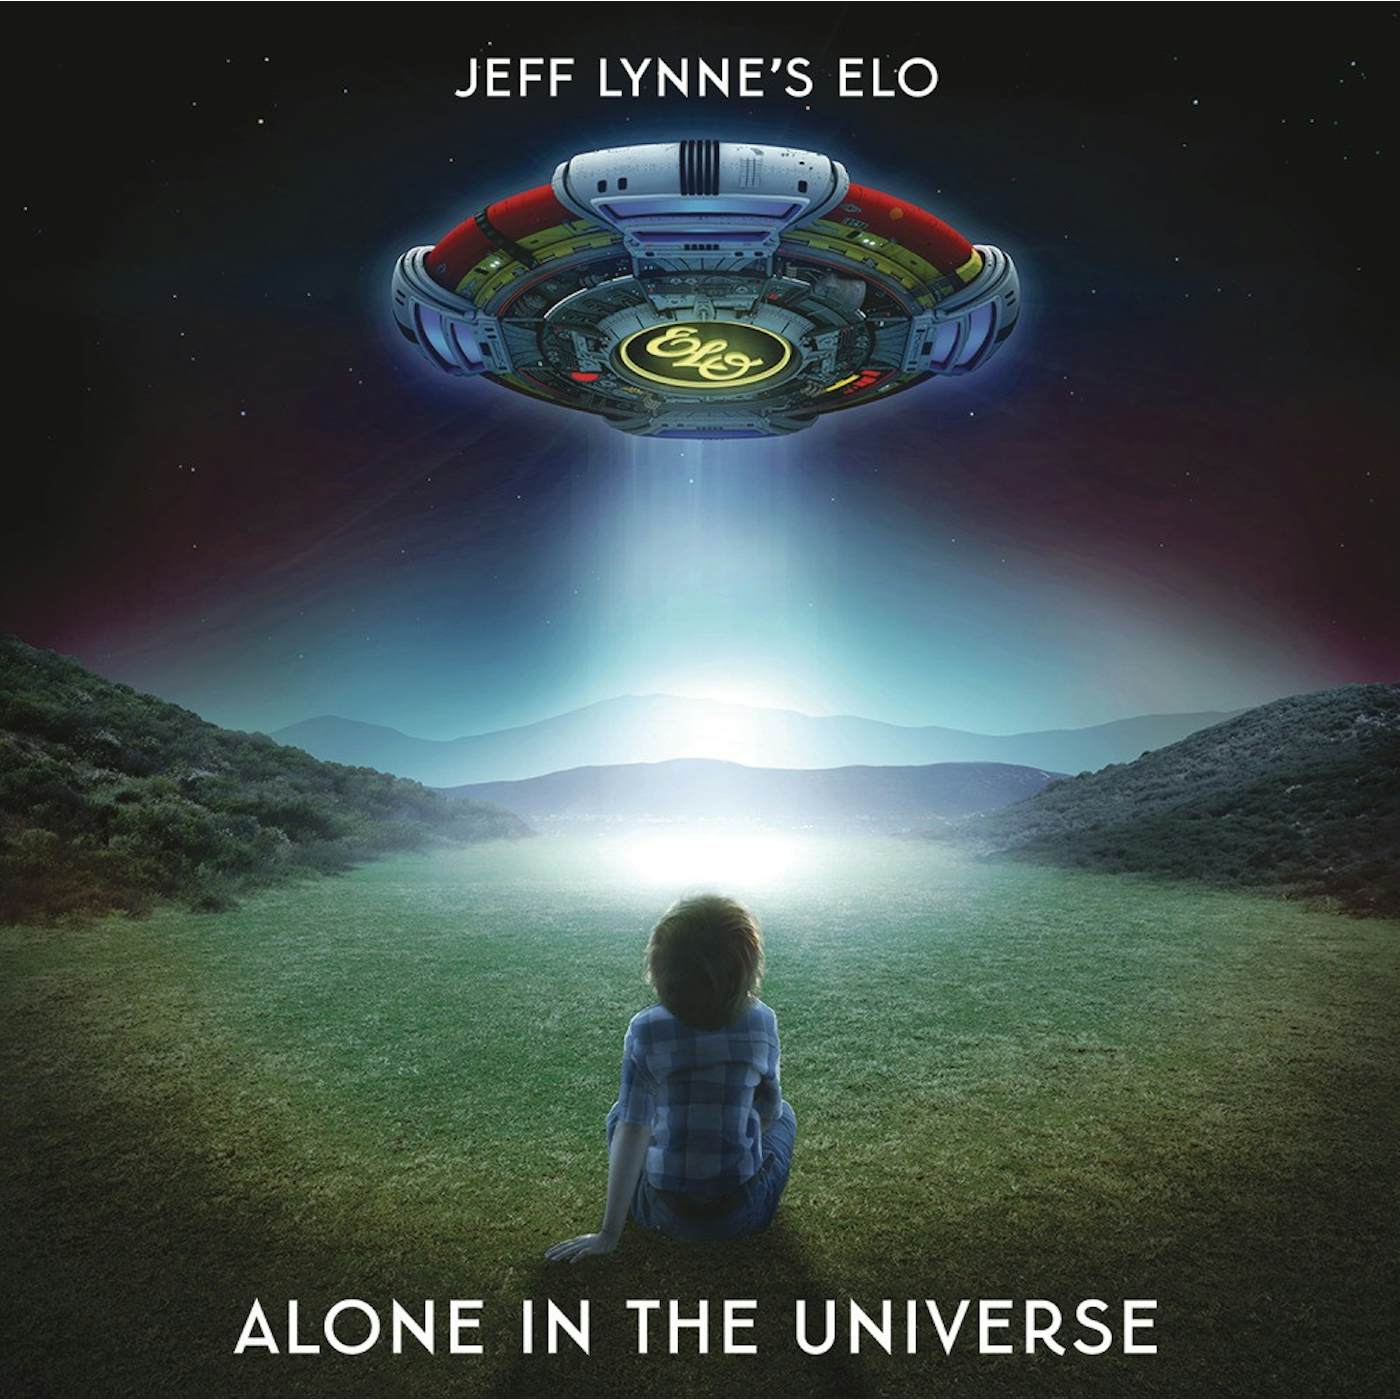 ELO (Electric Light Orchestra): ALONE IN THE UNIVERSE Vinyl Record